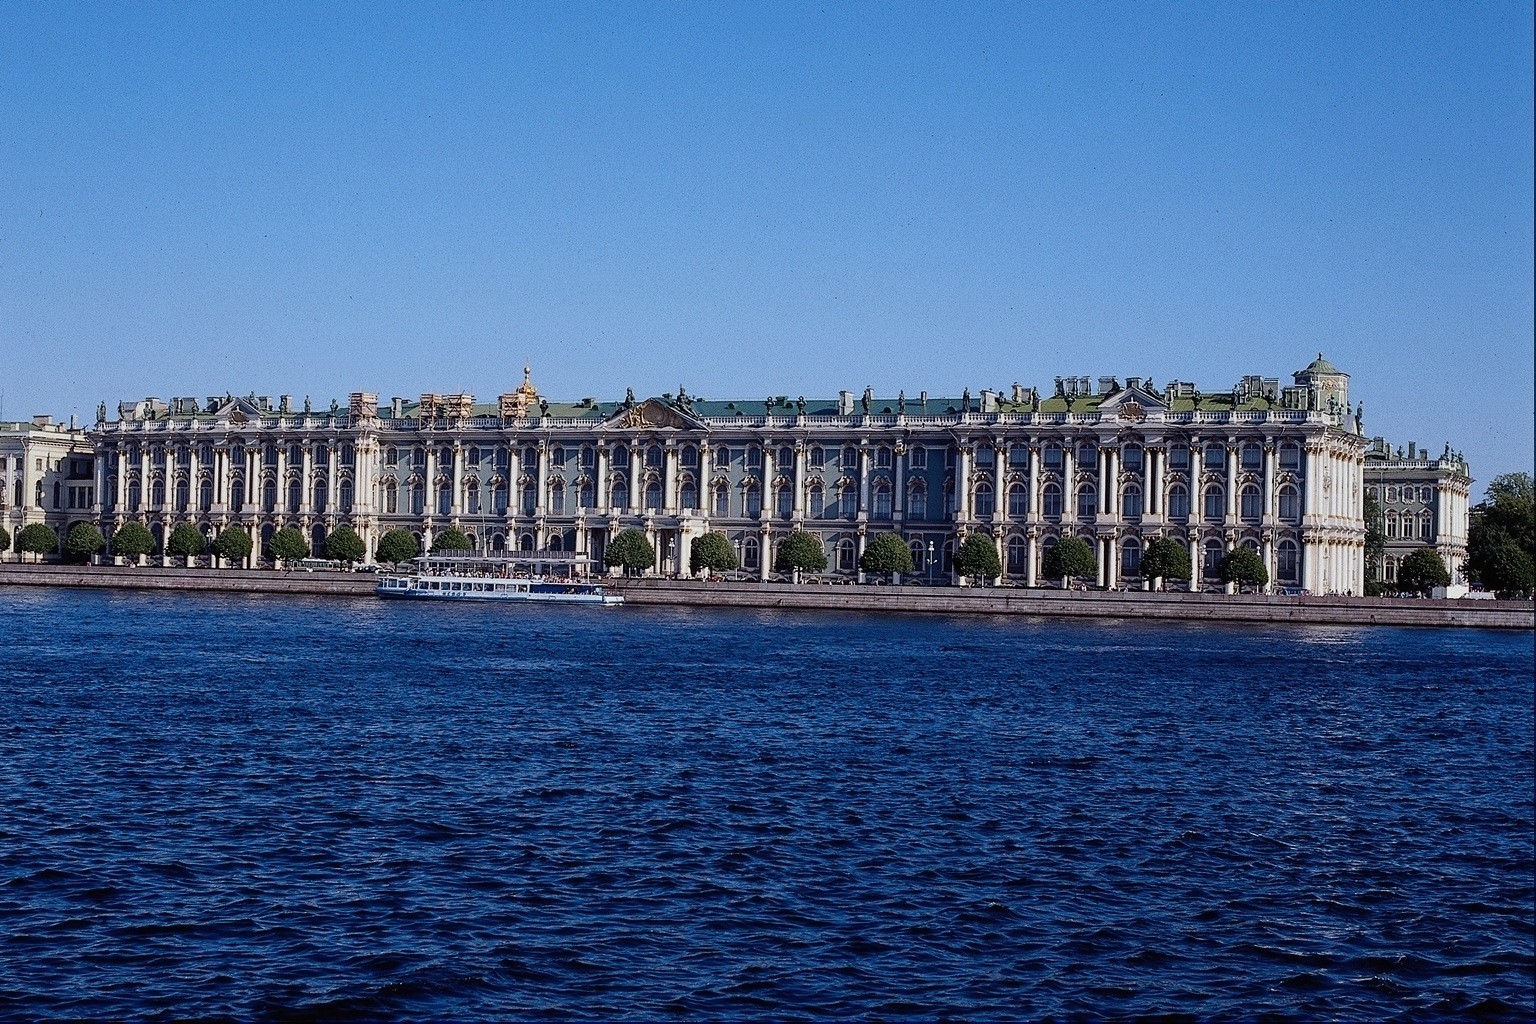 General 1536x1024 St. Petersburg palace Russia building water